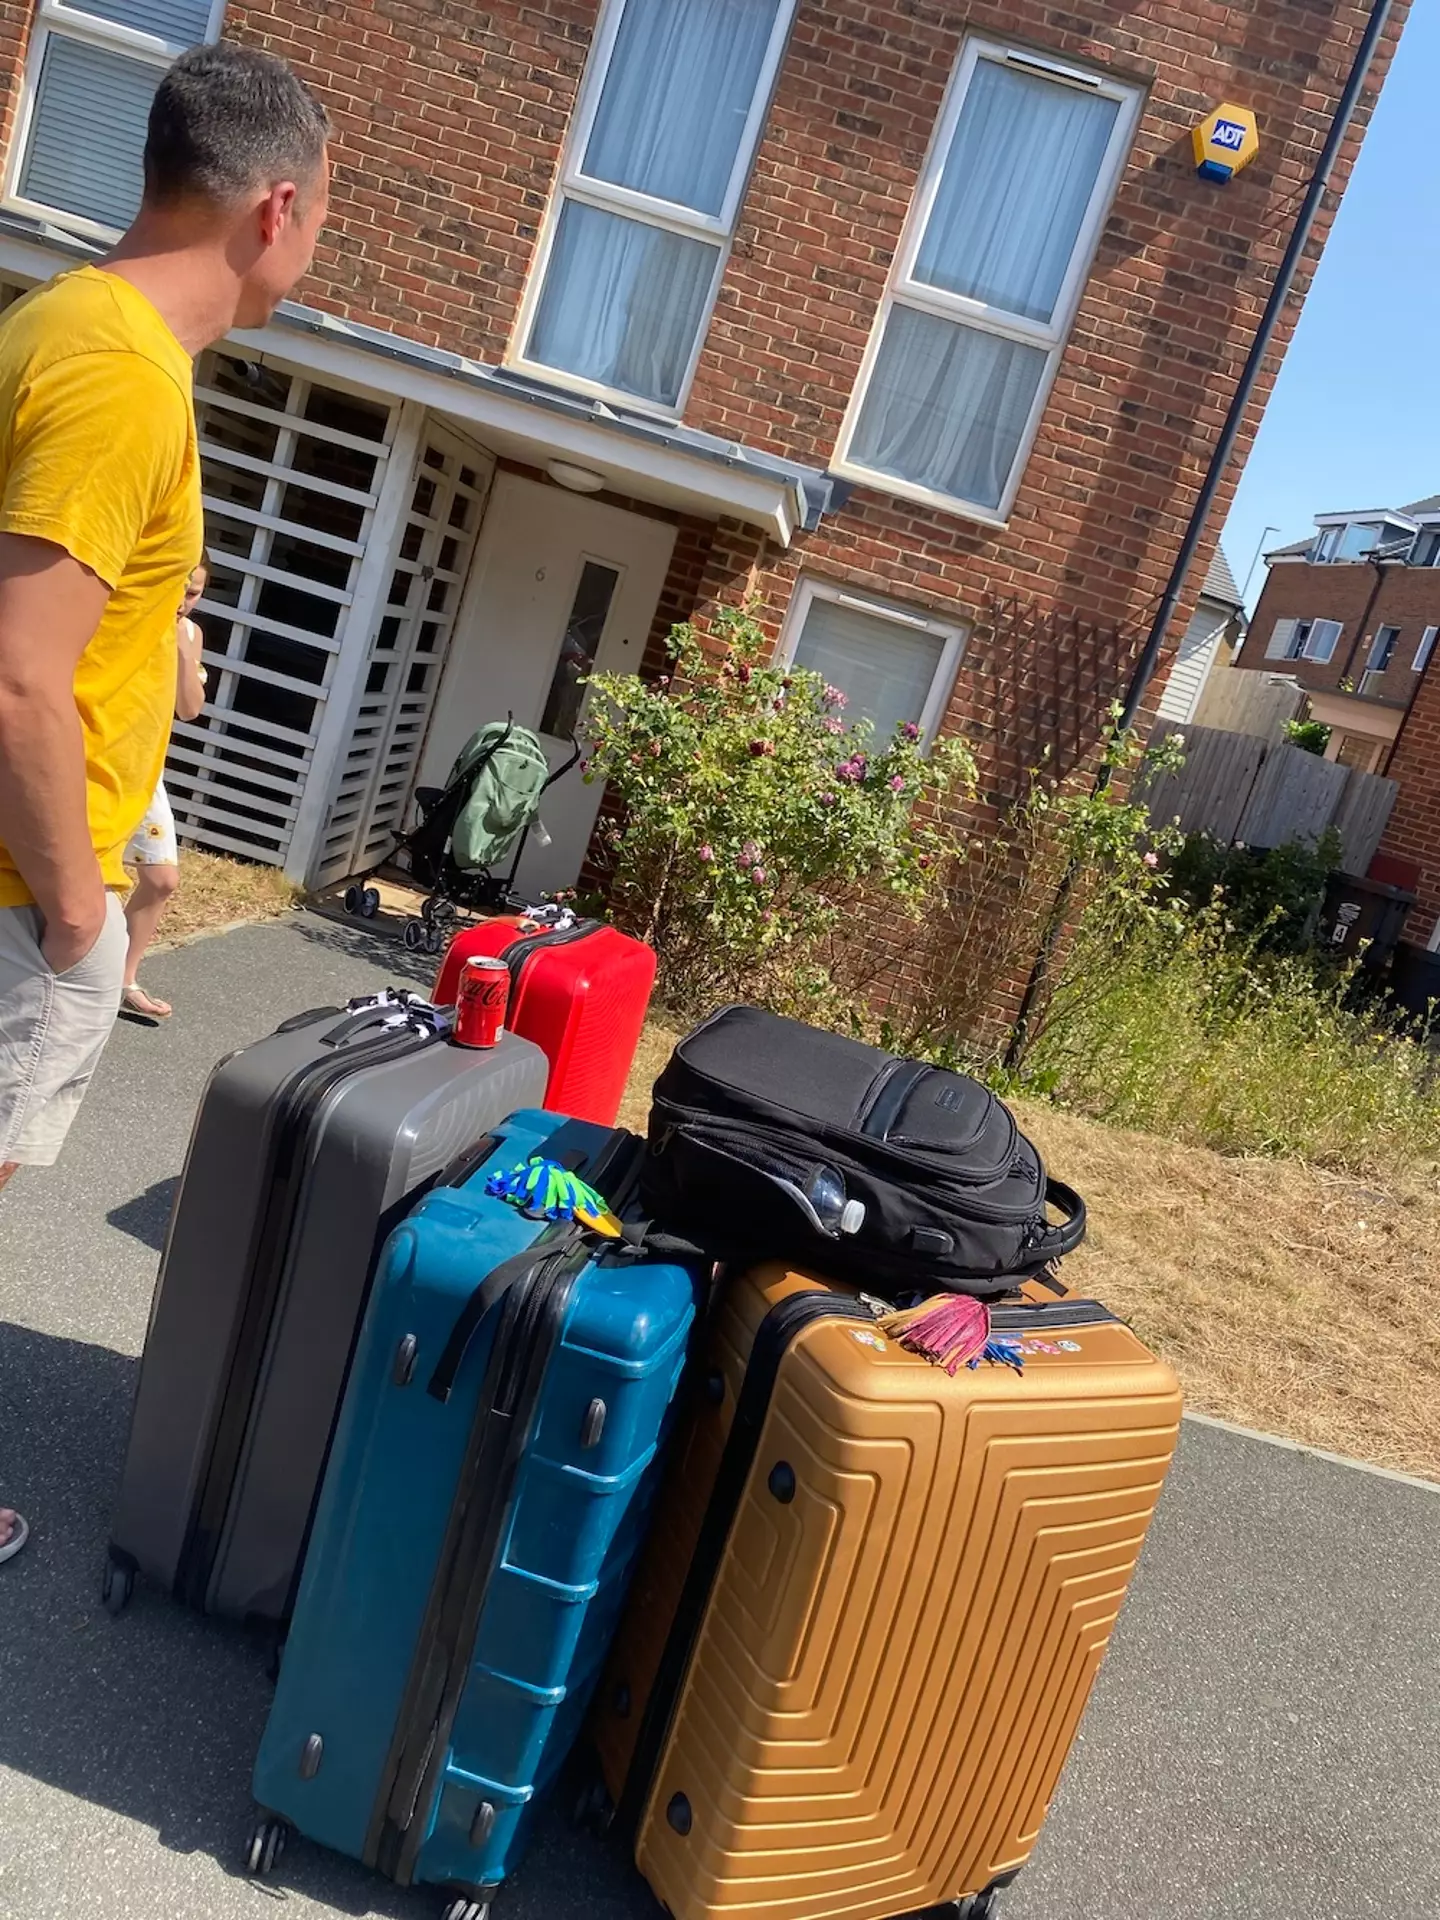 The family has been living out of their suitcases ever since.